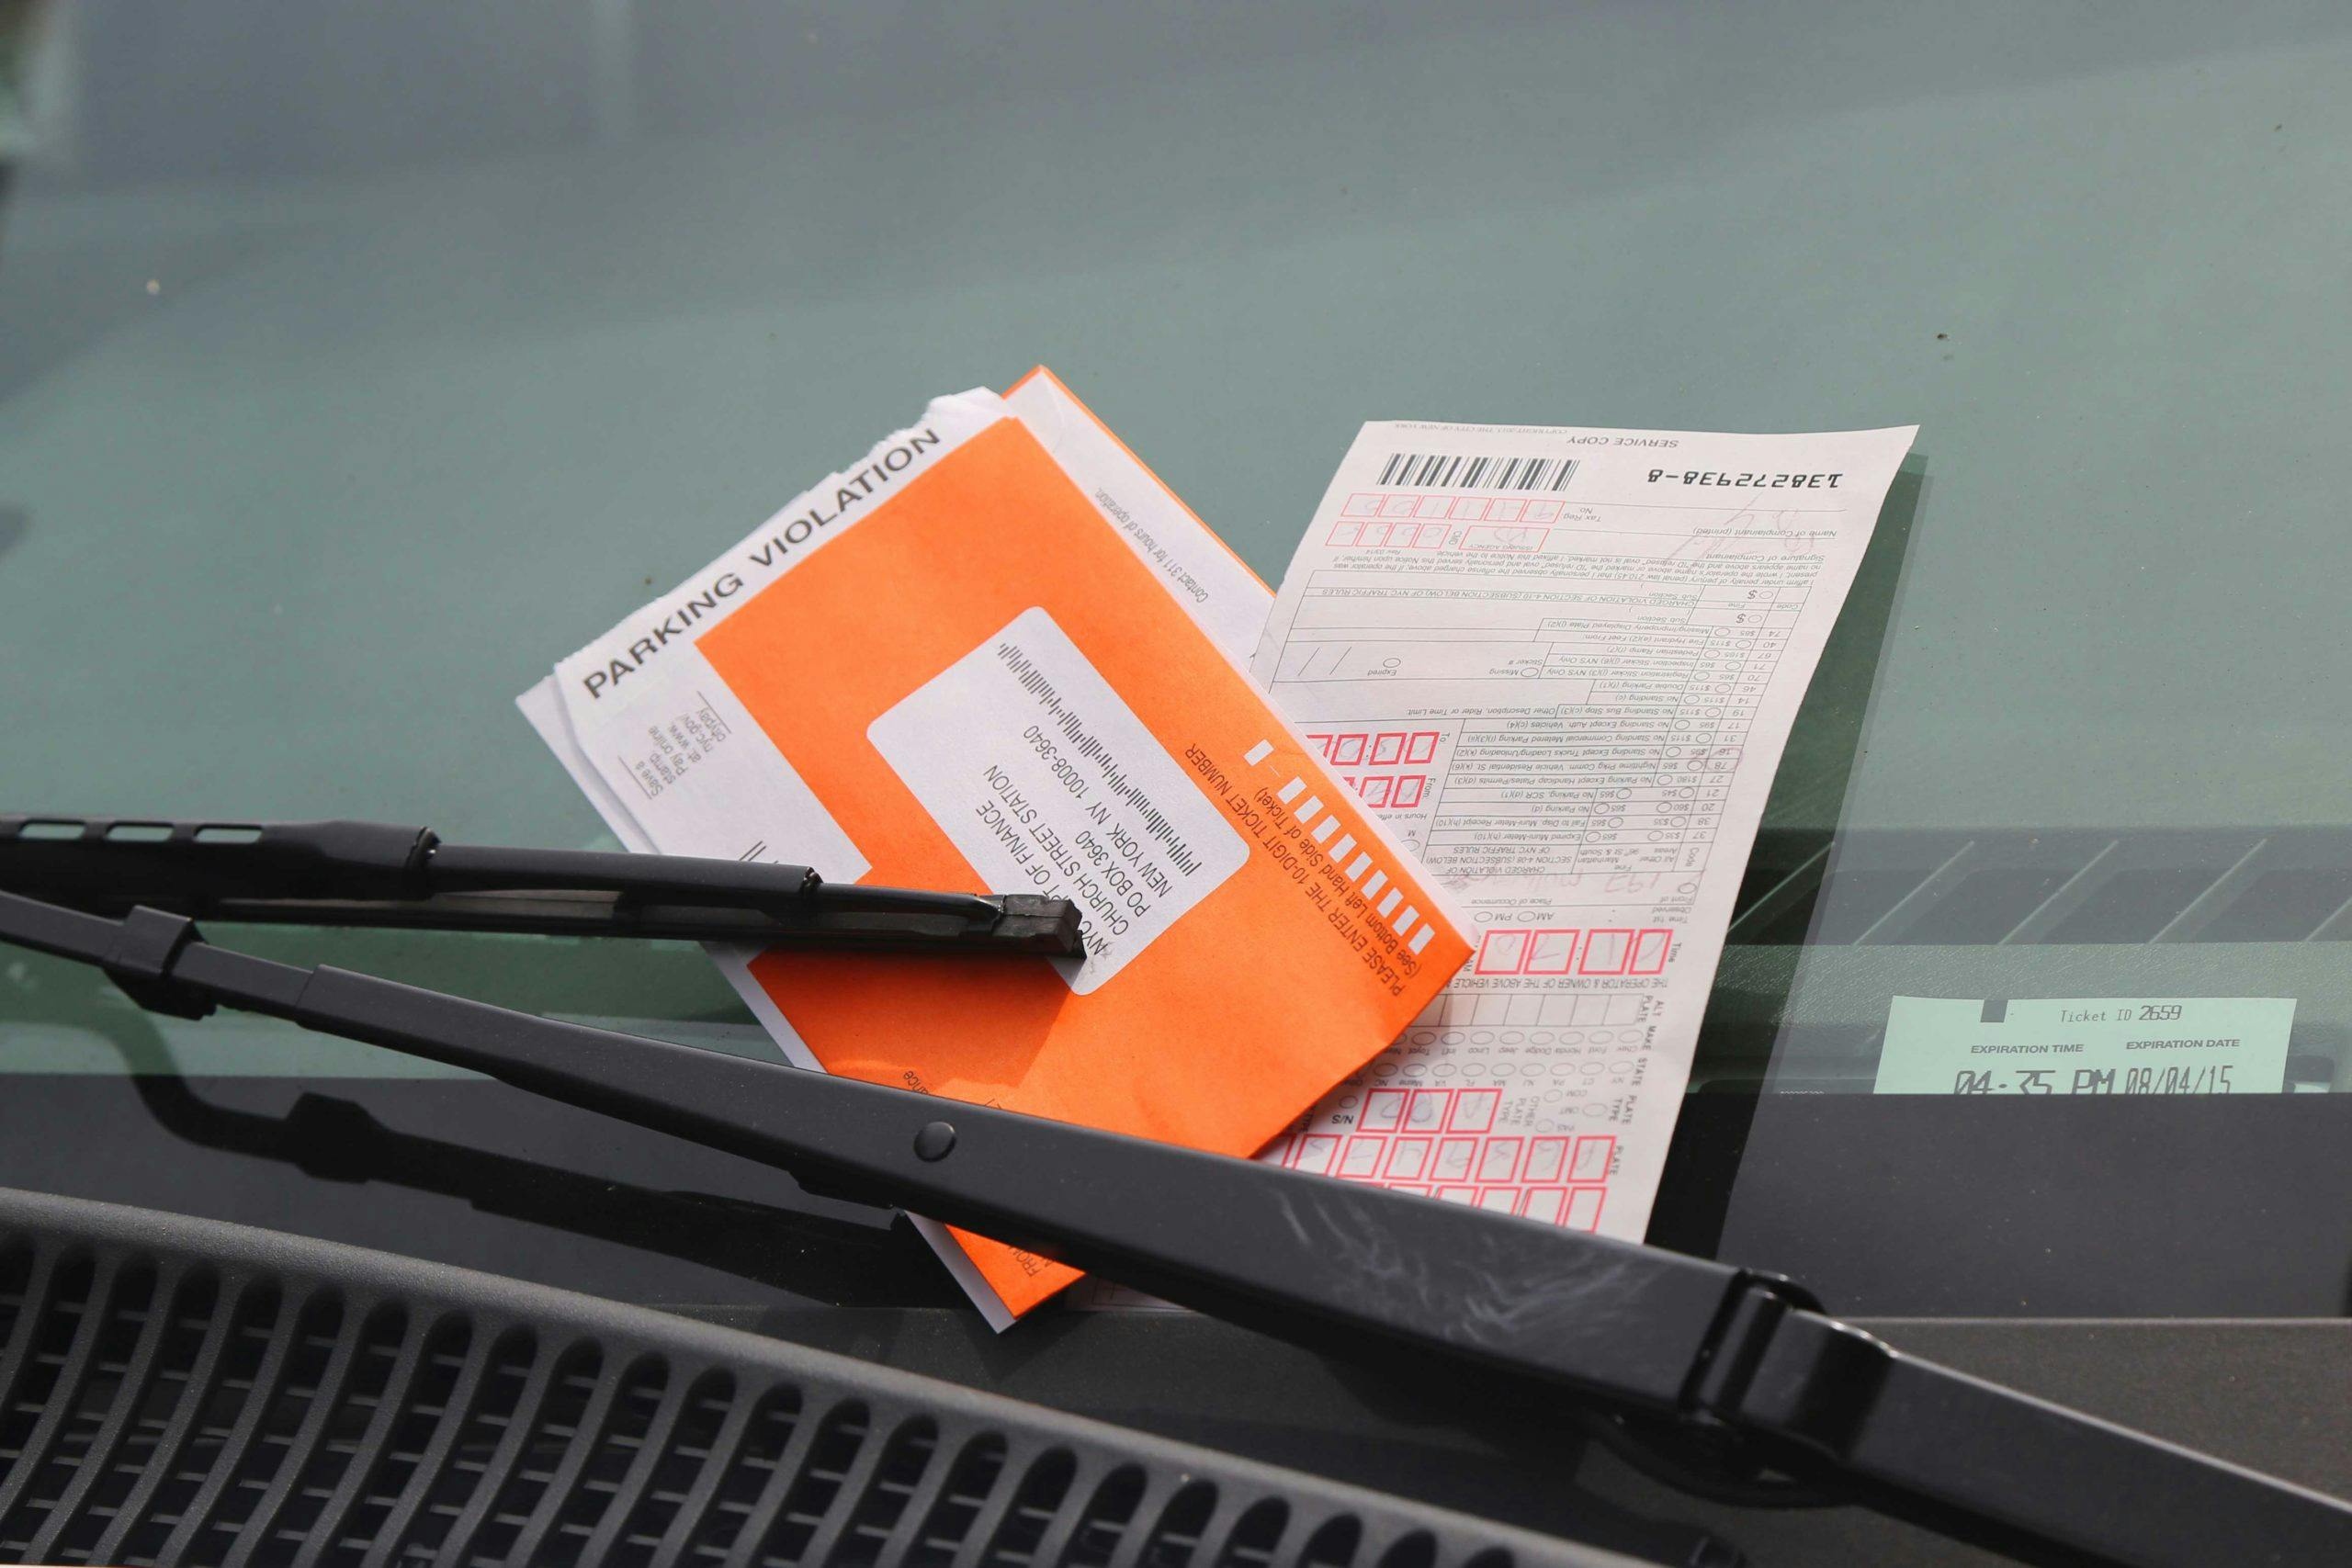 A cropped image of a windshield and windshield wipers with parking tickets tucked under the wipers. Accompanies the header for Voyager Parking Violations.